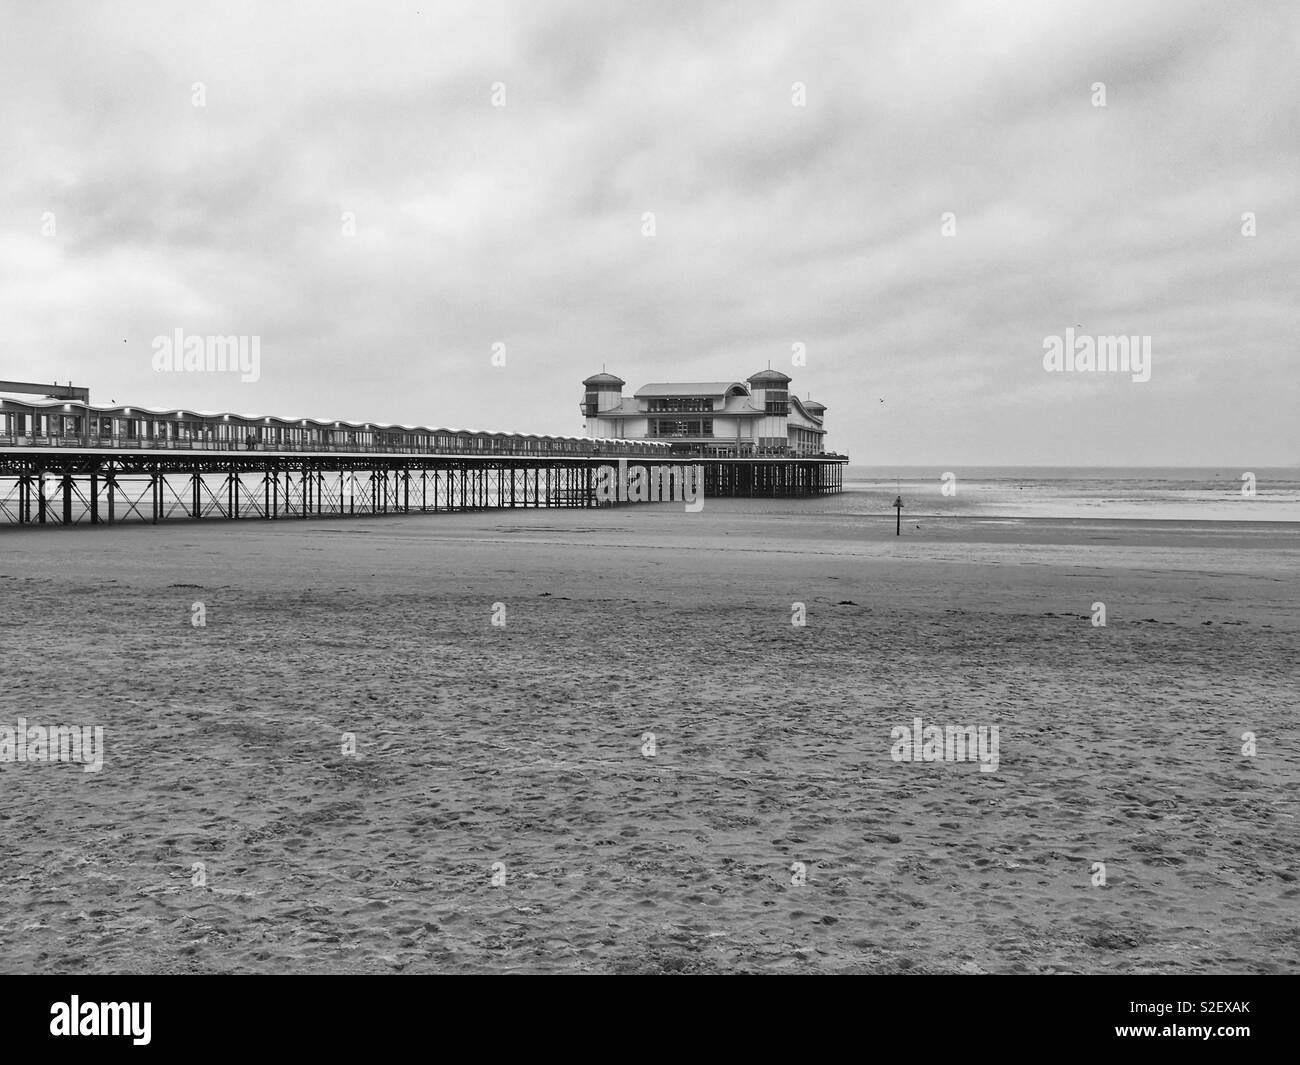 The Grand Pier in Weston-super-Mare, UK on an overcast autumn day Stock Photo